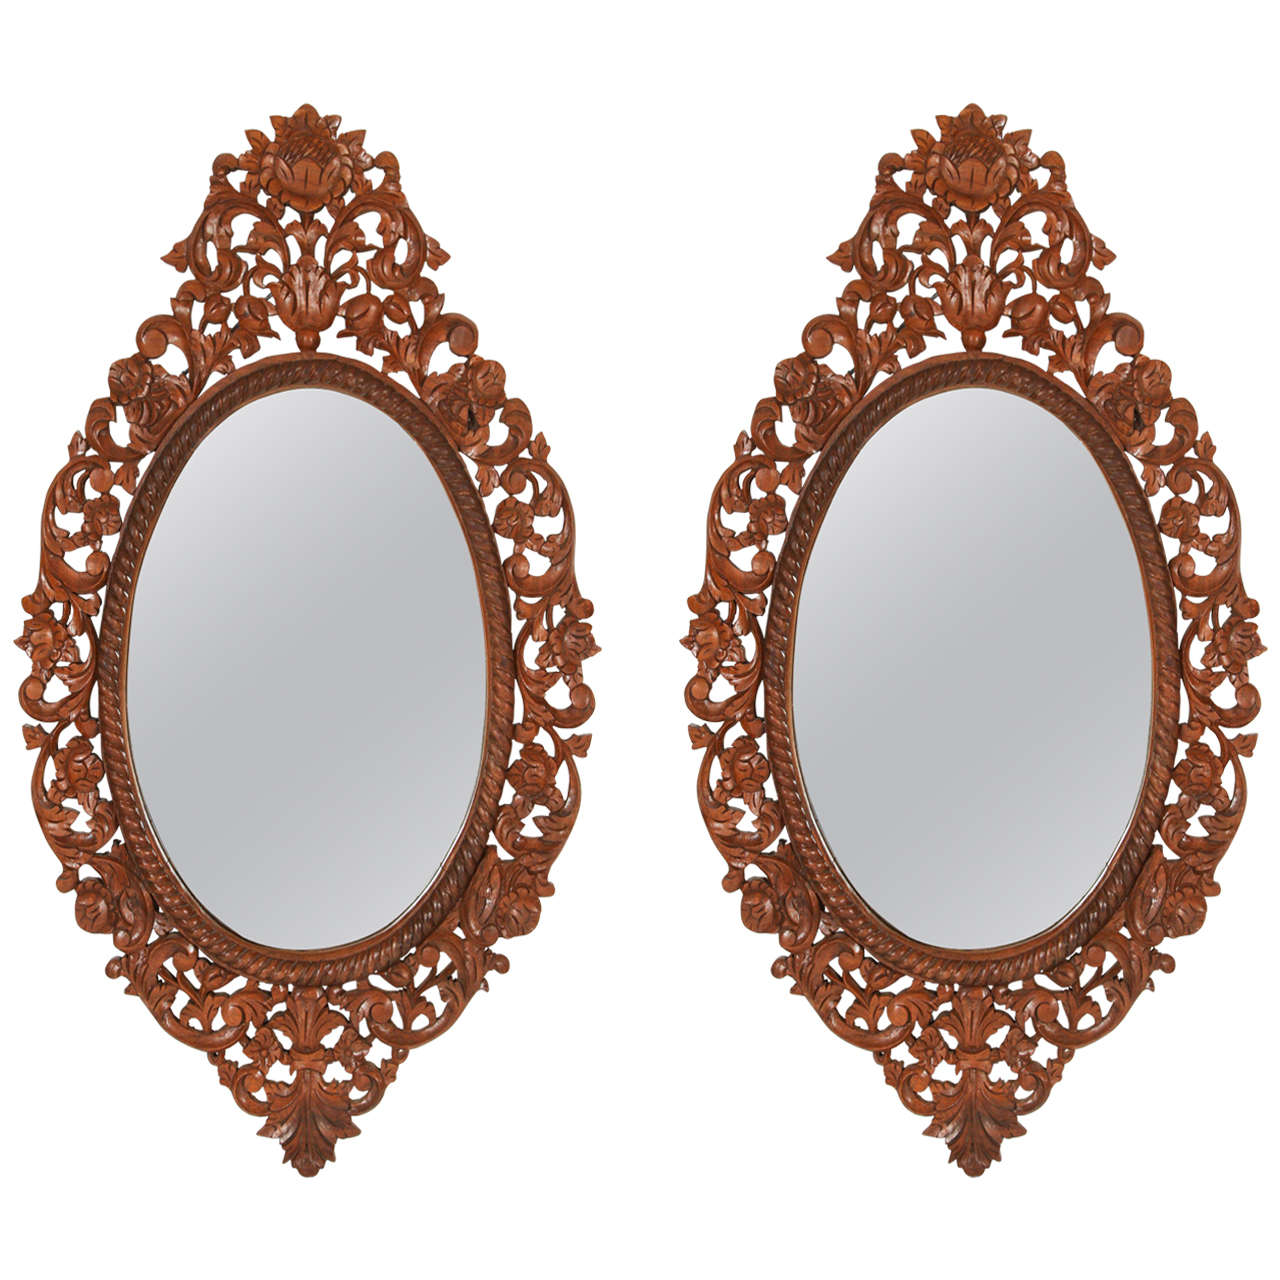 Carved Wood Oval Mirror